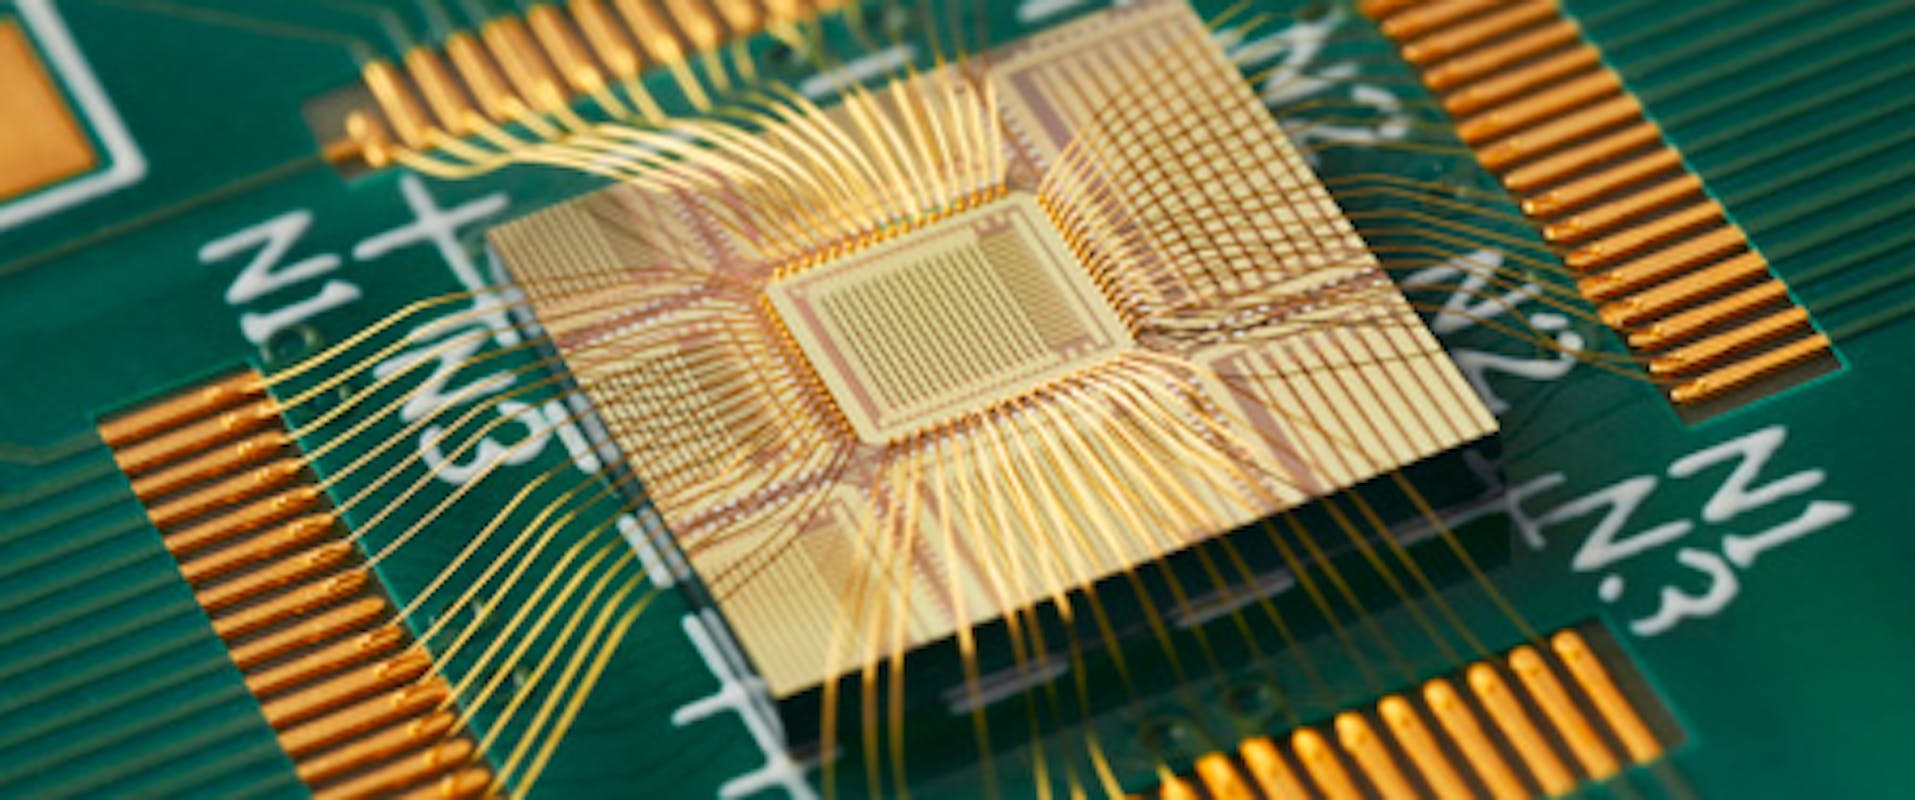 Photon counting chip